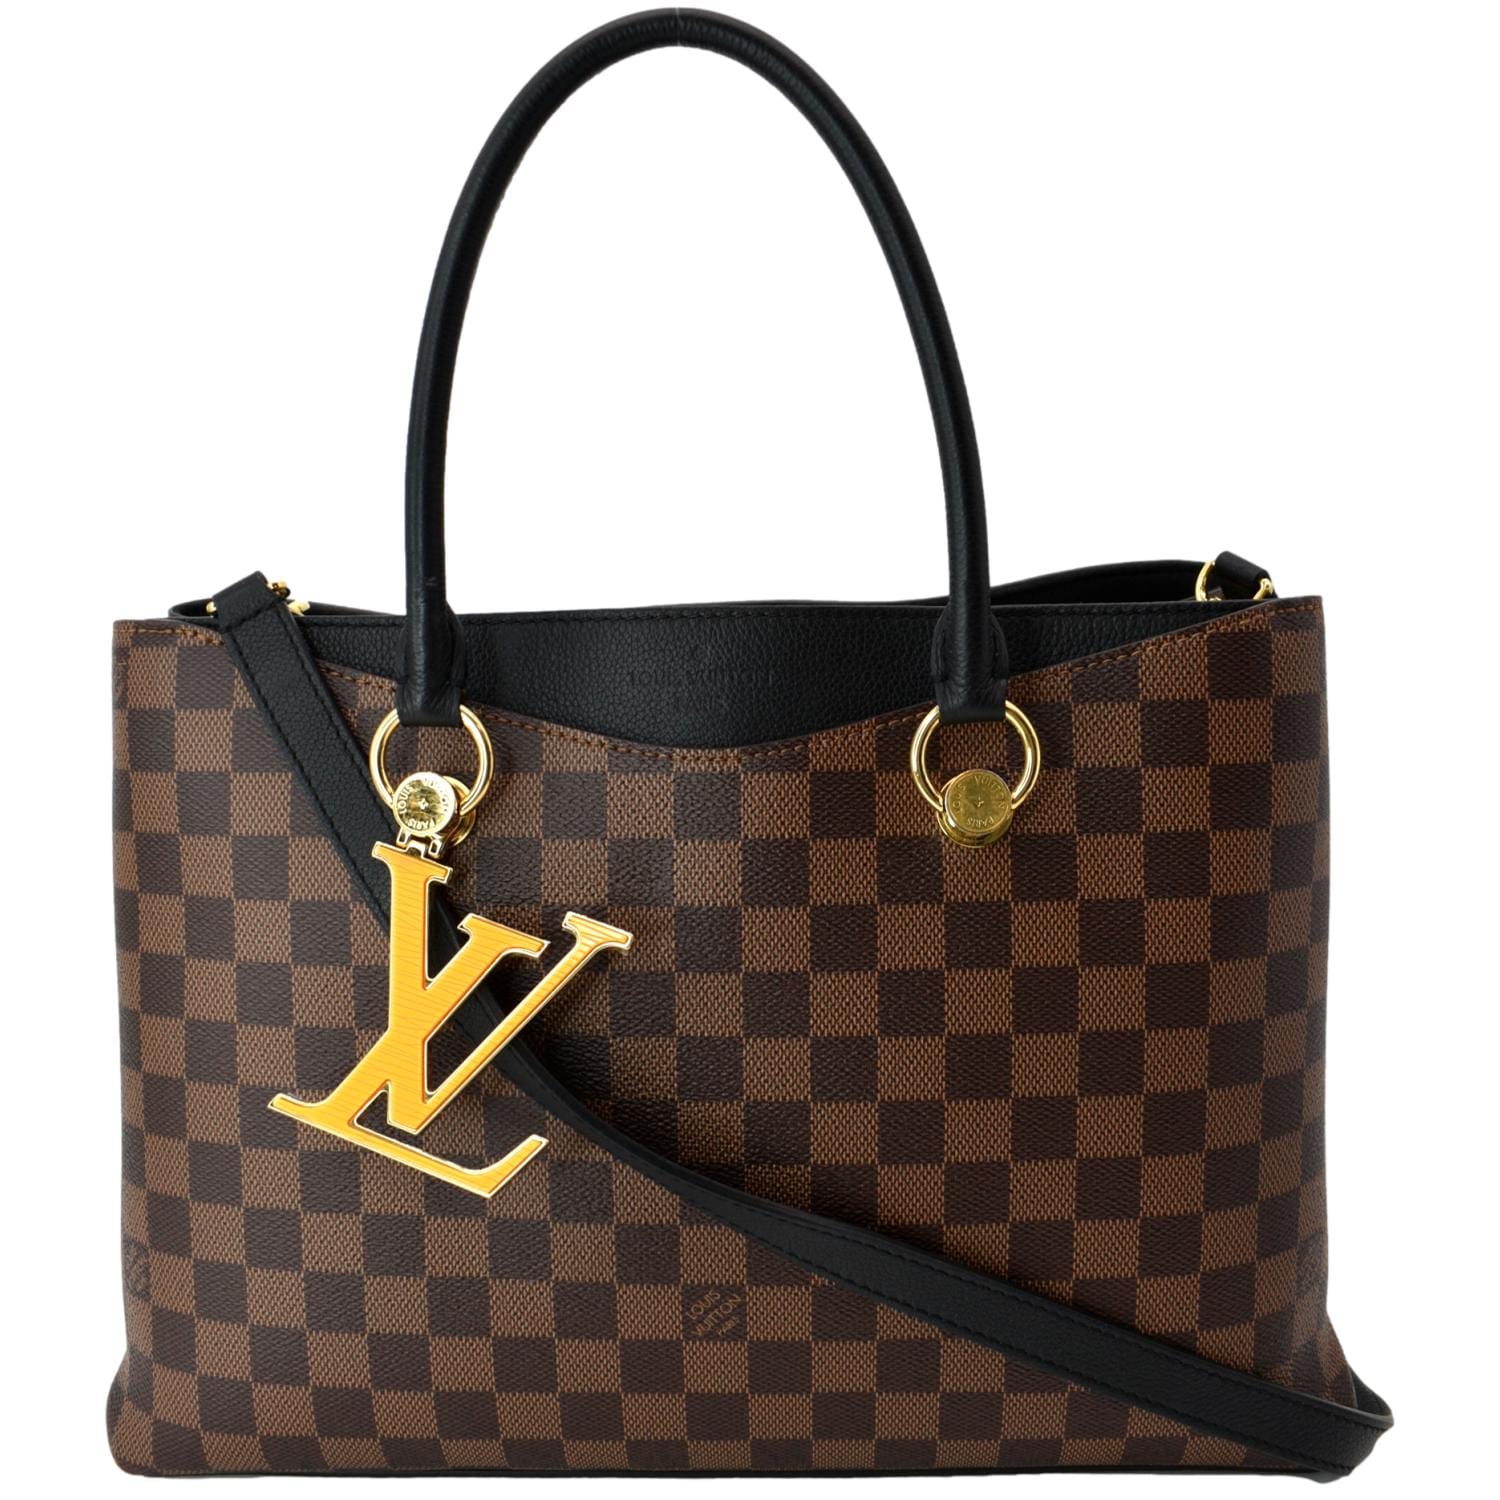 ALL DOM LOVES • Luxury Consignment в Instagram : Louis Vuitton Riverside  Two Way Shoulder Bag ❤️ Brand new and available to shop now!  www.alldomloves.com